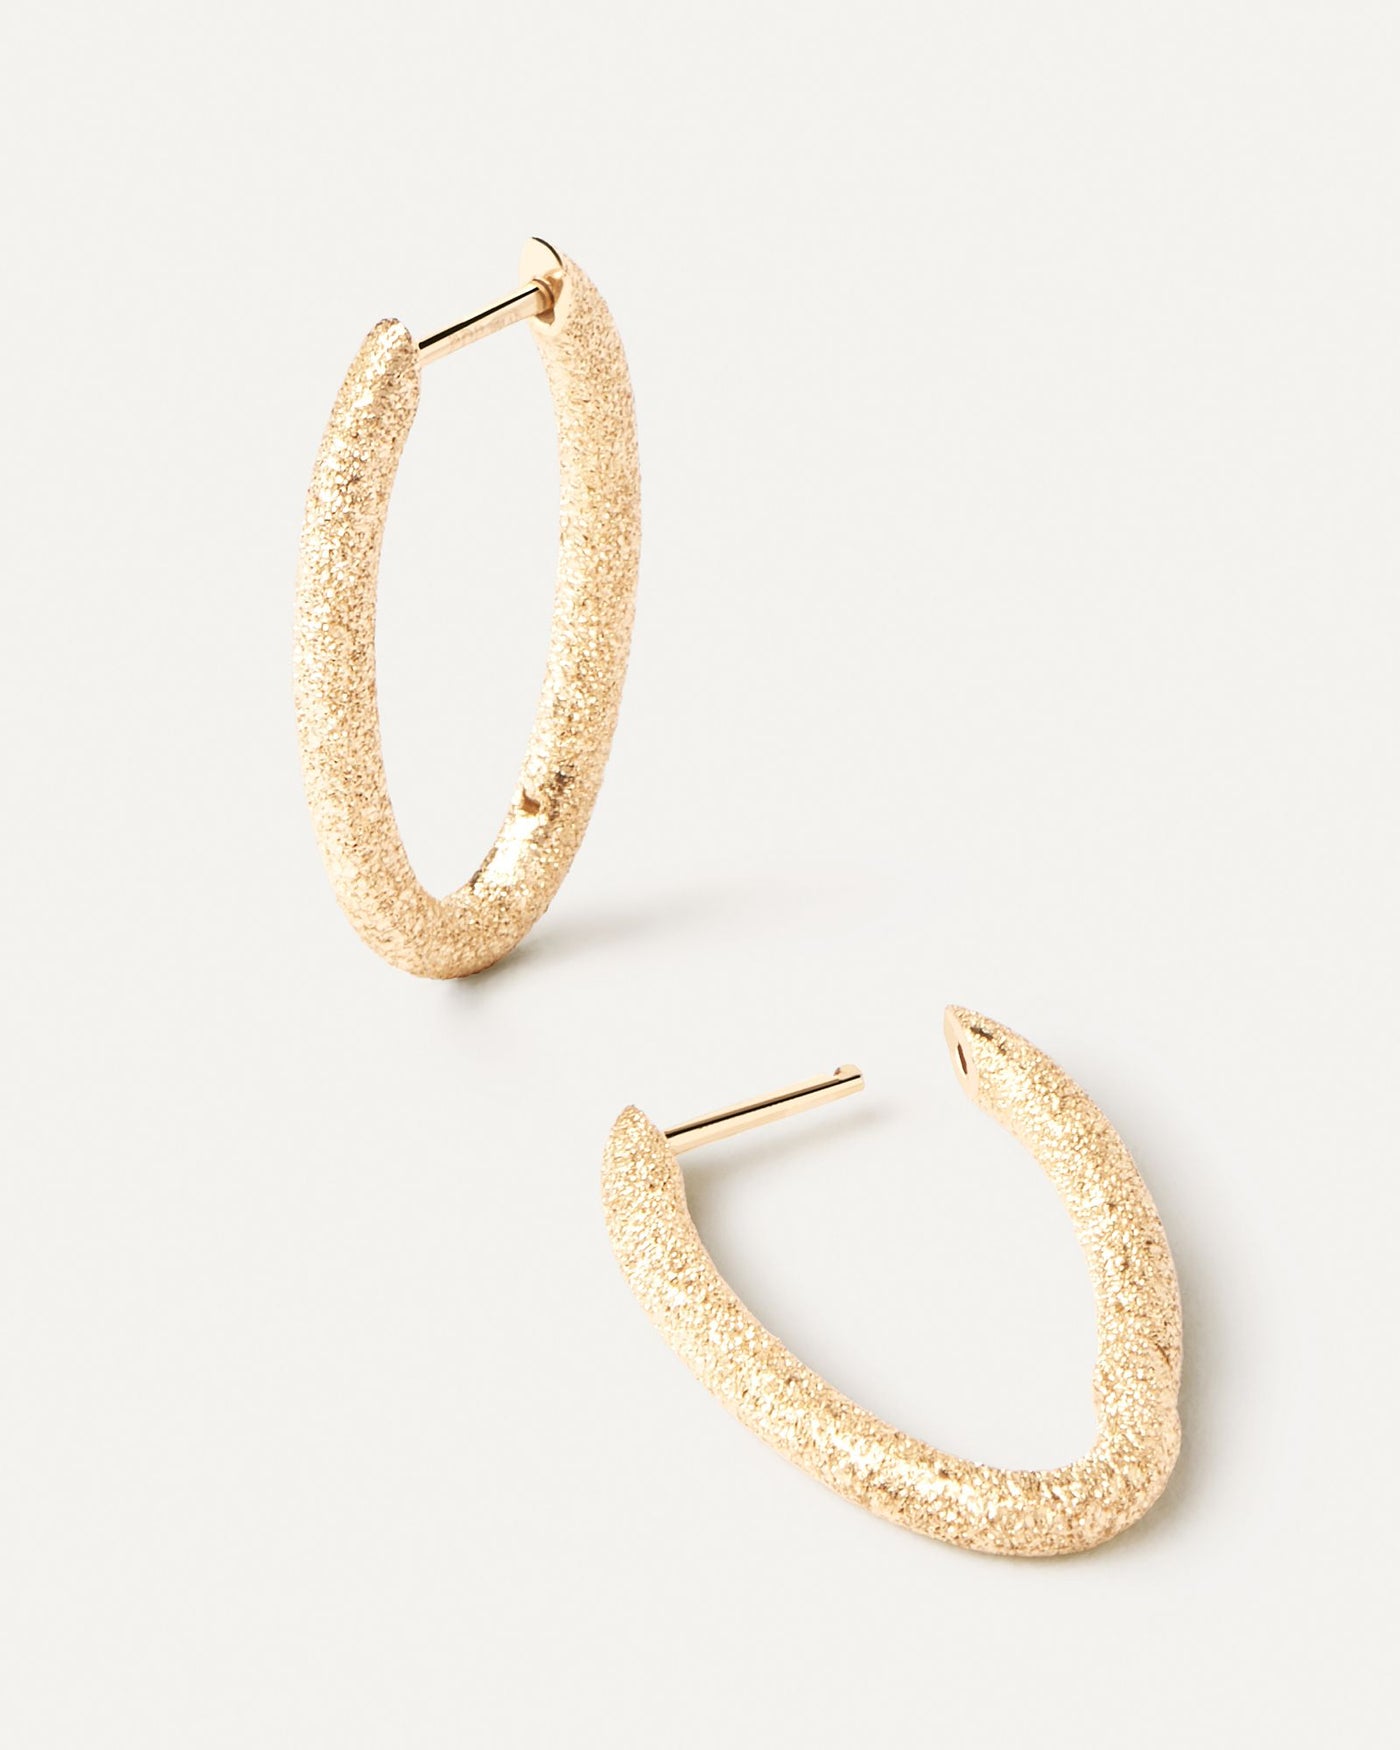 2024 Selection | Sandblasted Gold Vera Hoops. Distinctive oval hoop earrings in solid yellow gold with a sandblast finish. Get the latest arrival from PDPAOLA. Place your order safely and get this Best Seller. Free Shipping.